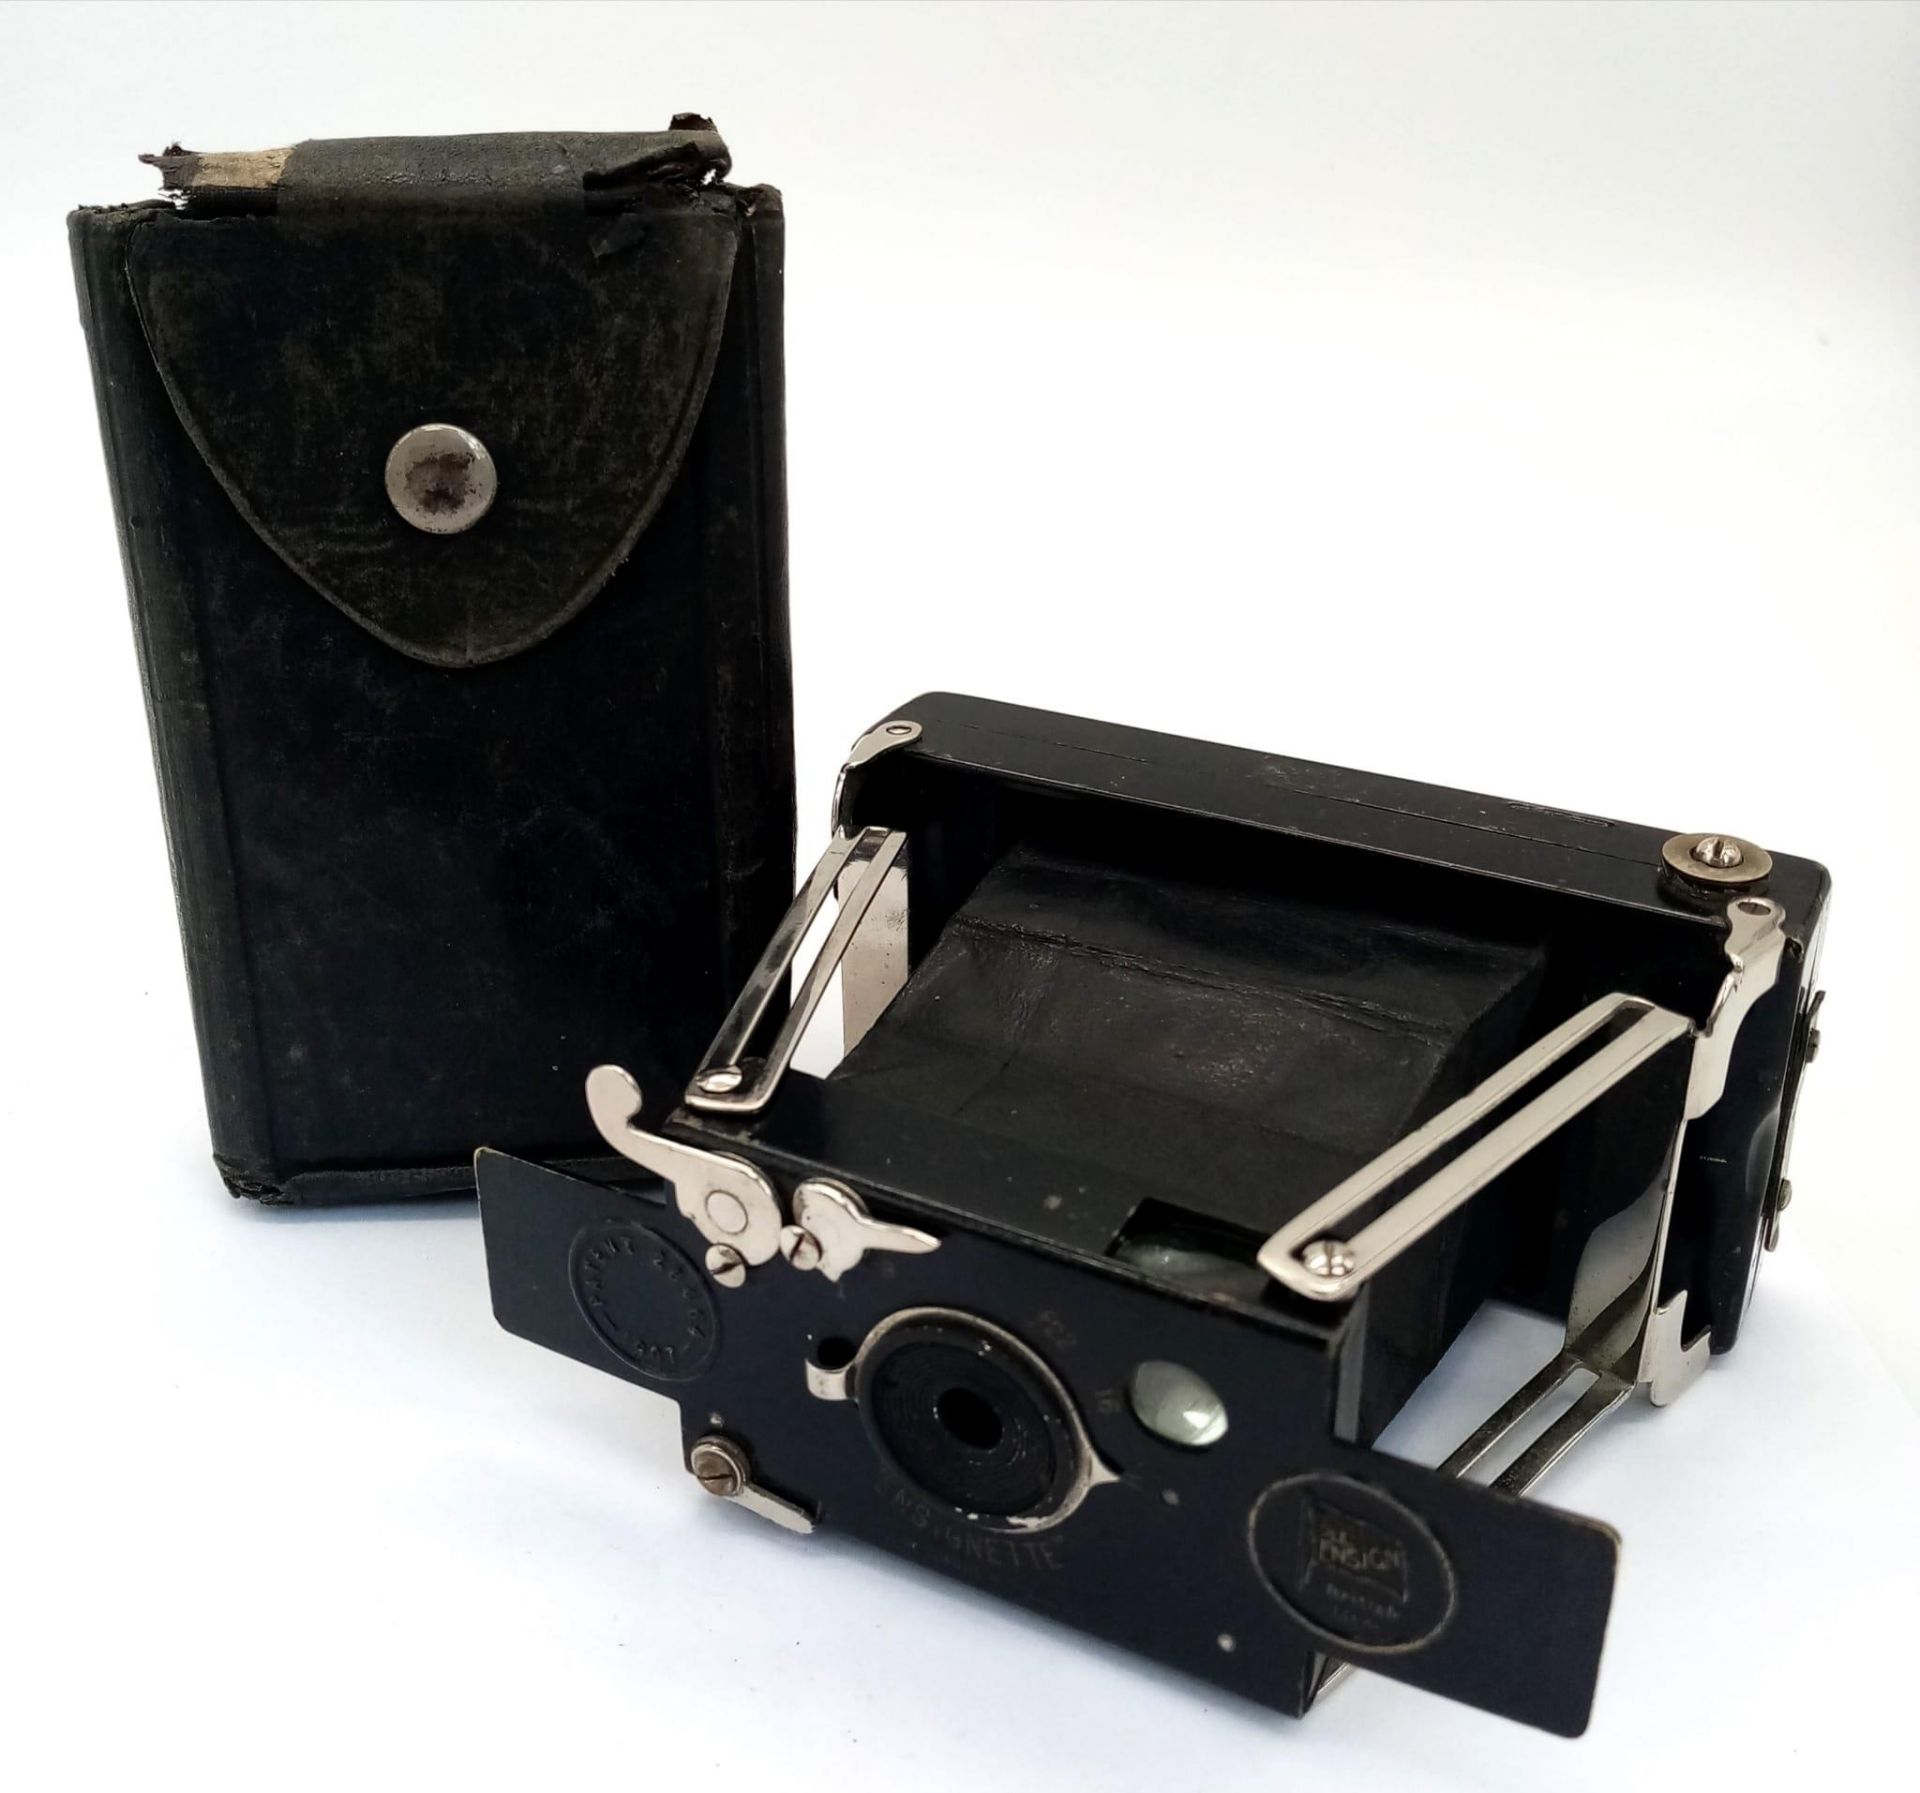 WW1 Era Mini Folding Camera. This once belonged to Cpl Sam Bicketon of the Army Service Corps who